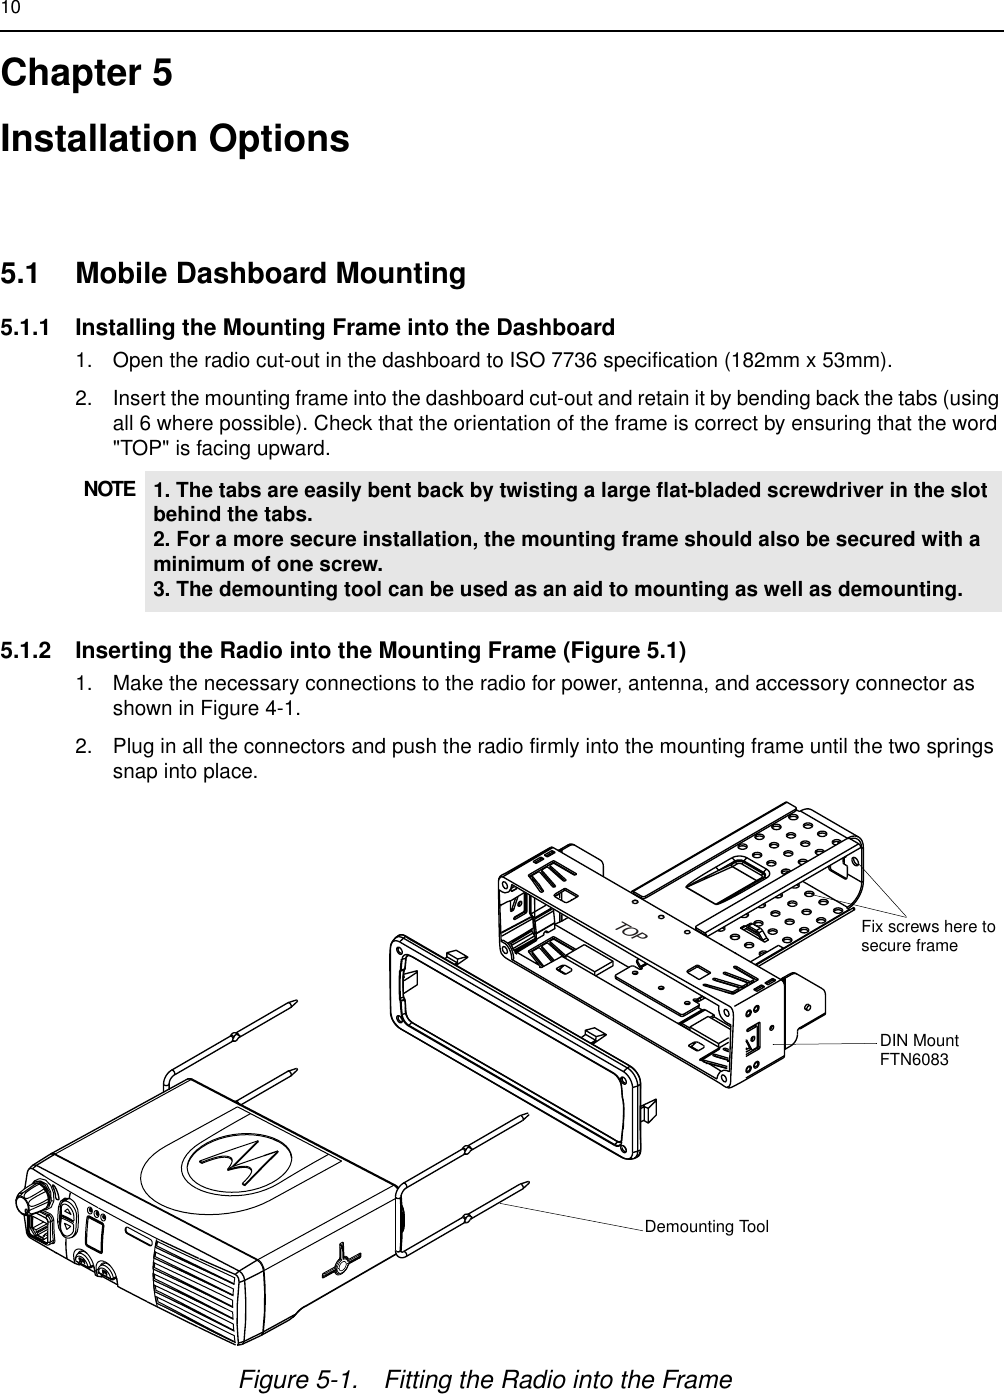 10Chapter 5Installation Options 5.1 Mobile Dashboard Mounting5.1.1 Installing the Mounting Frame into the Dashboard1. Open the radio cut-out in the dashboard to ISO 7736 specification (182mm x 53mm).2. Insert the mounting frame into the dashboard cut-out and retain it by bending back the tabs (using all 6 where possible). Check that the orientation of the frame is correct by ensuring that the word &quot;TOP&quot; is facing upward. 5.1.2 Inserting the Radio into the Mounting Frame (Figure 5.1)1. Make the necessary connections to the radio for power, antenna, and accessory connector as shown in Figure 4-1.2. Plug in all the connectors and push the radio firmly into the mounting frame until the two springs snap into place.NOTE 1. The tabs are easily bent back by twisting a large flat-bladed screwdriver in the slot behind the tabs.2. For a more secure installation, the mounting frame should also be secured with a minimum of one screw.3. The demounting tool can be used as an aid to mounting as well as demounting.TOPFigure 5-1. Fitting the Radio into the FrameDemounting ToolDIN MountFTN6083Fix screws here tosecure frame